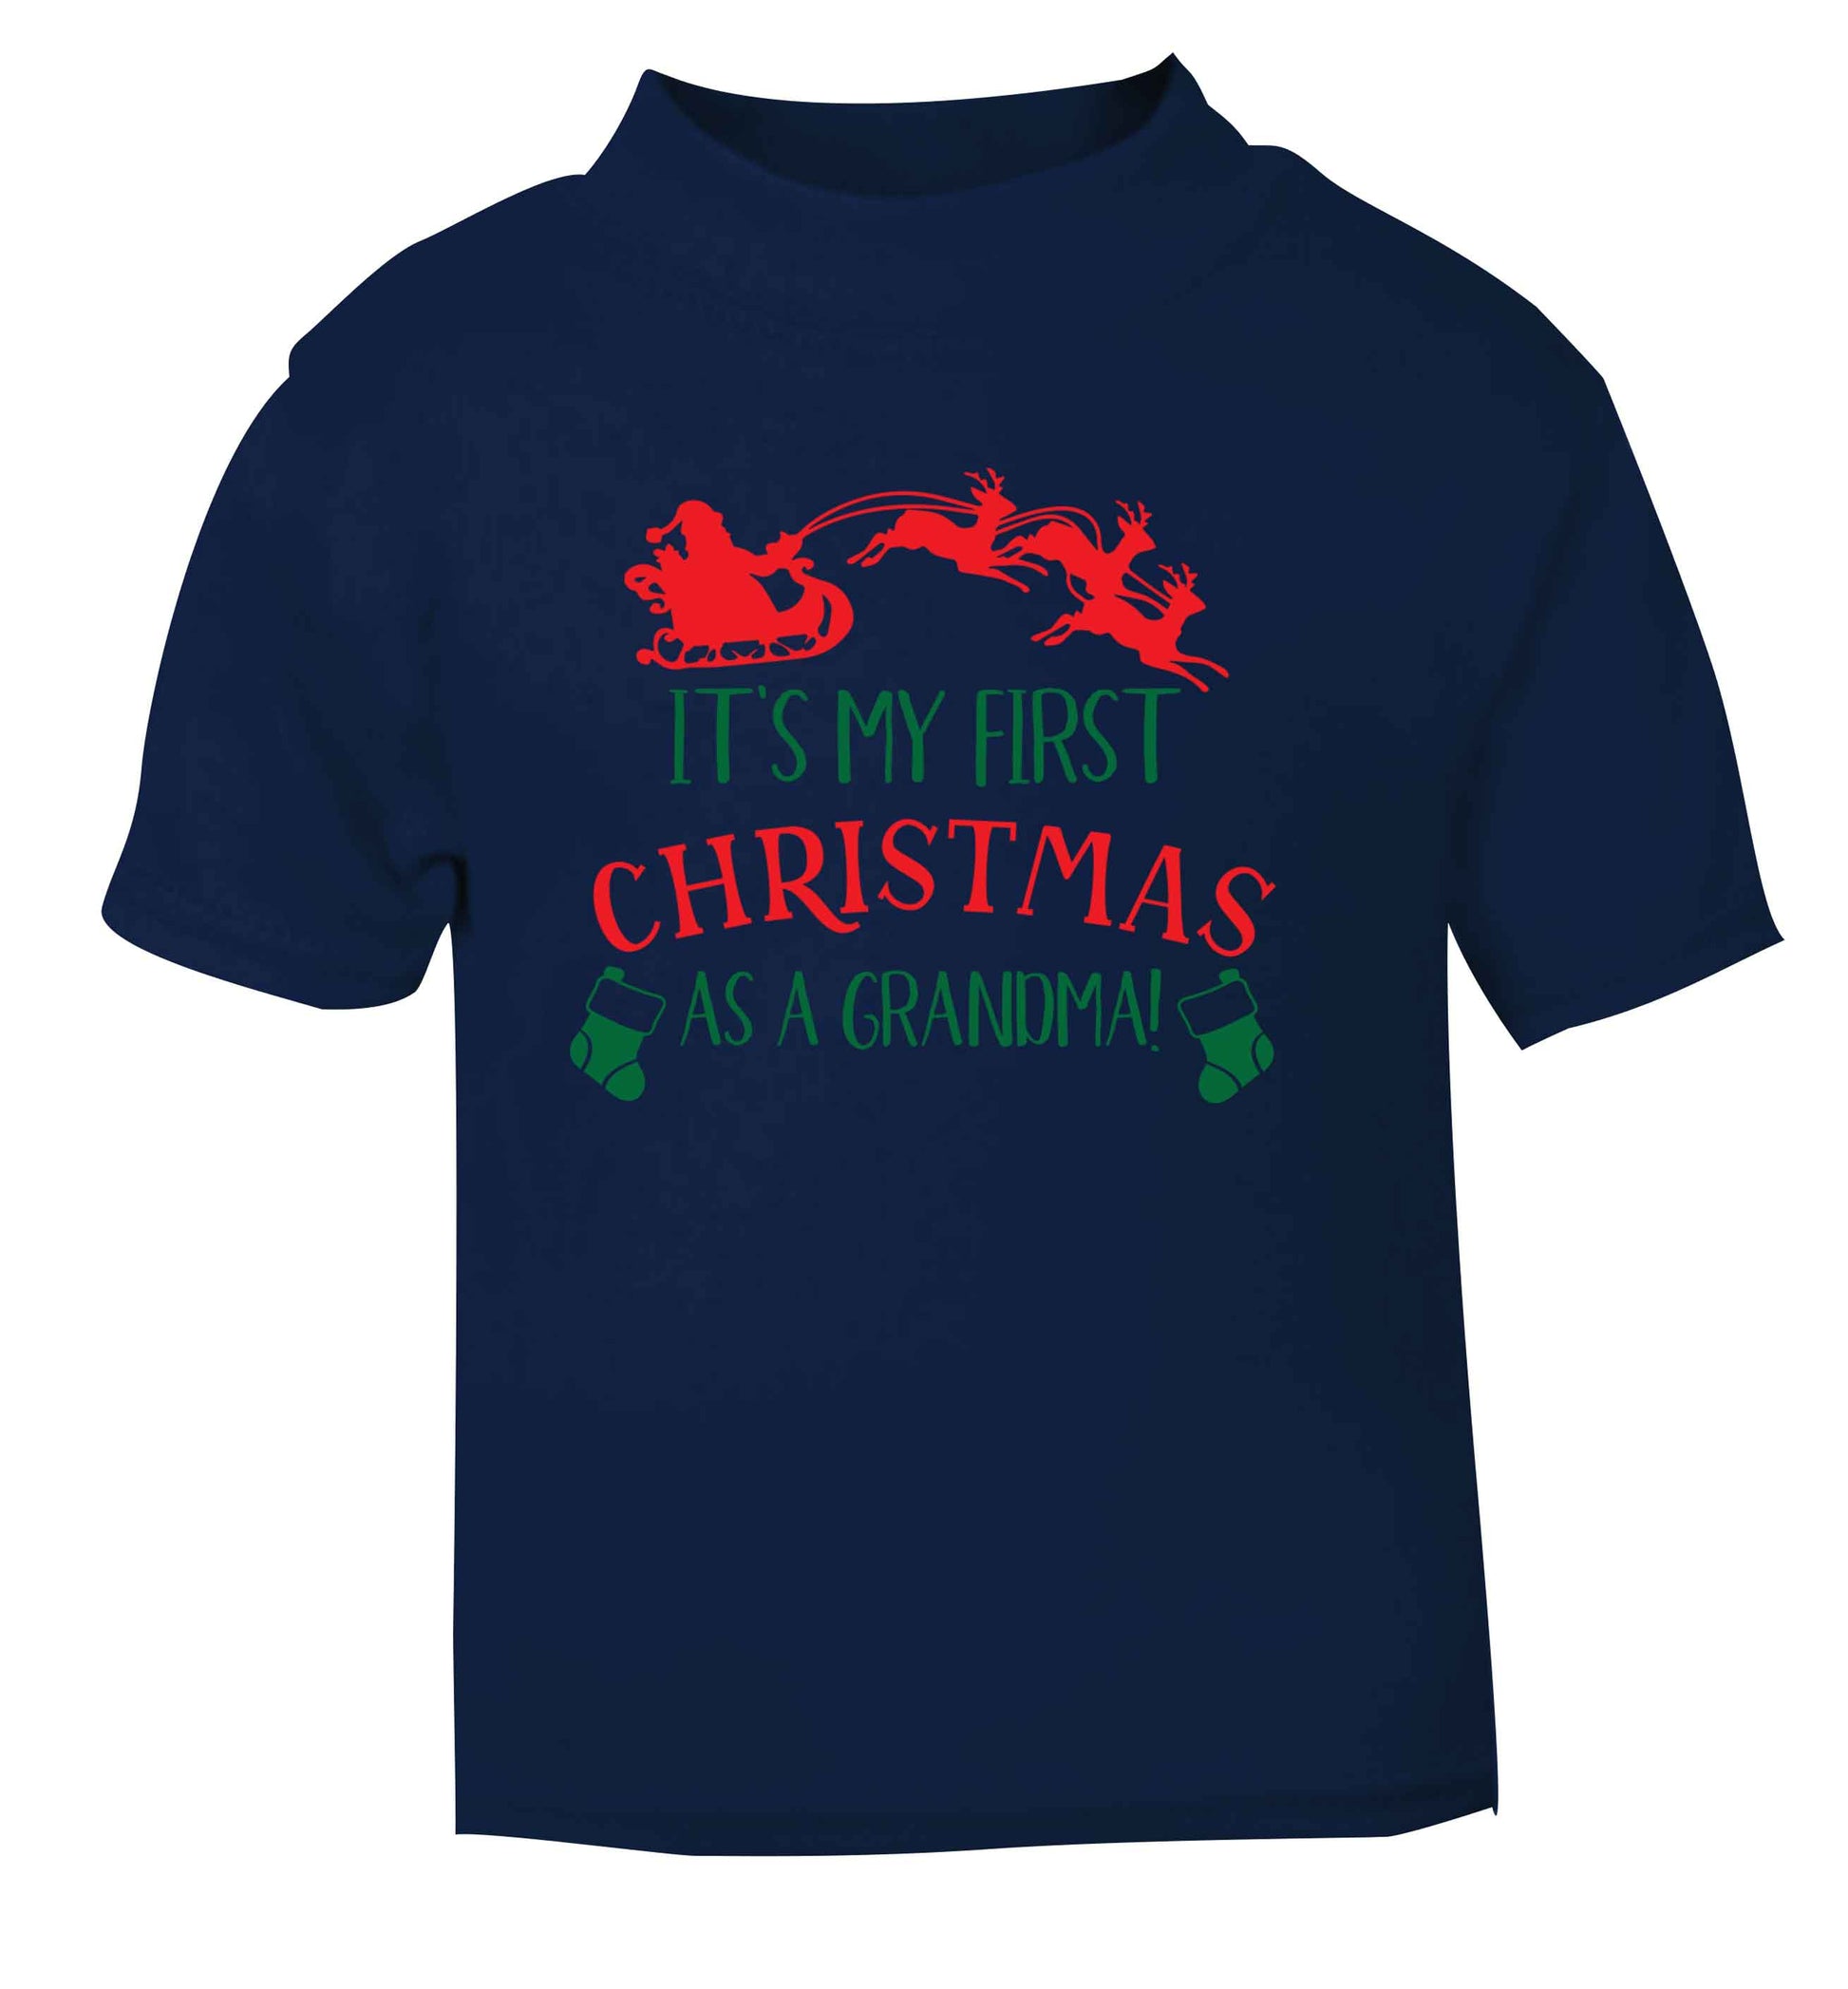 It's my first Christmas as a grandma! navy Baby Toddler Tshirt 2 Years